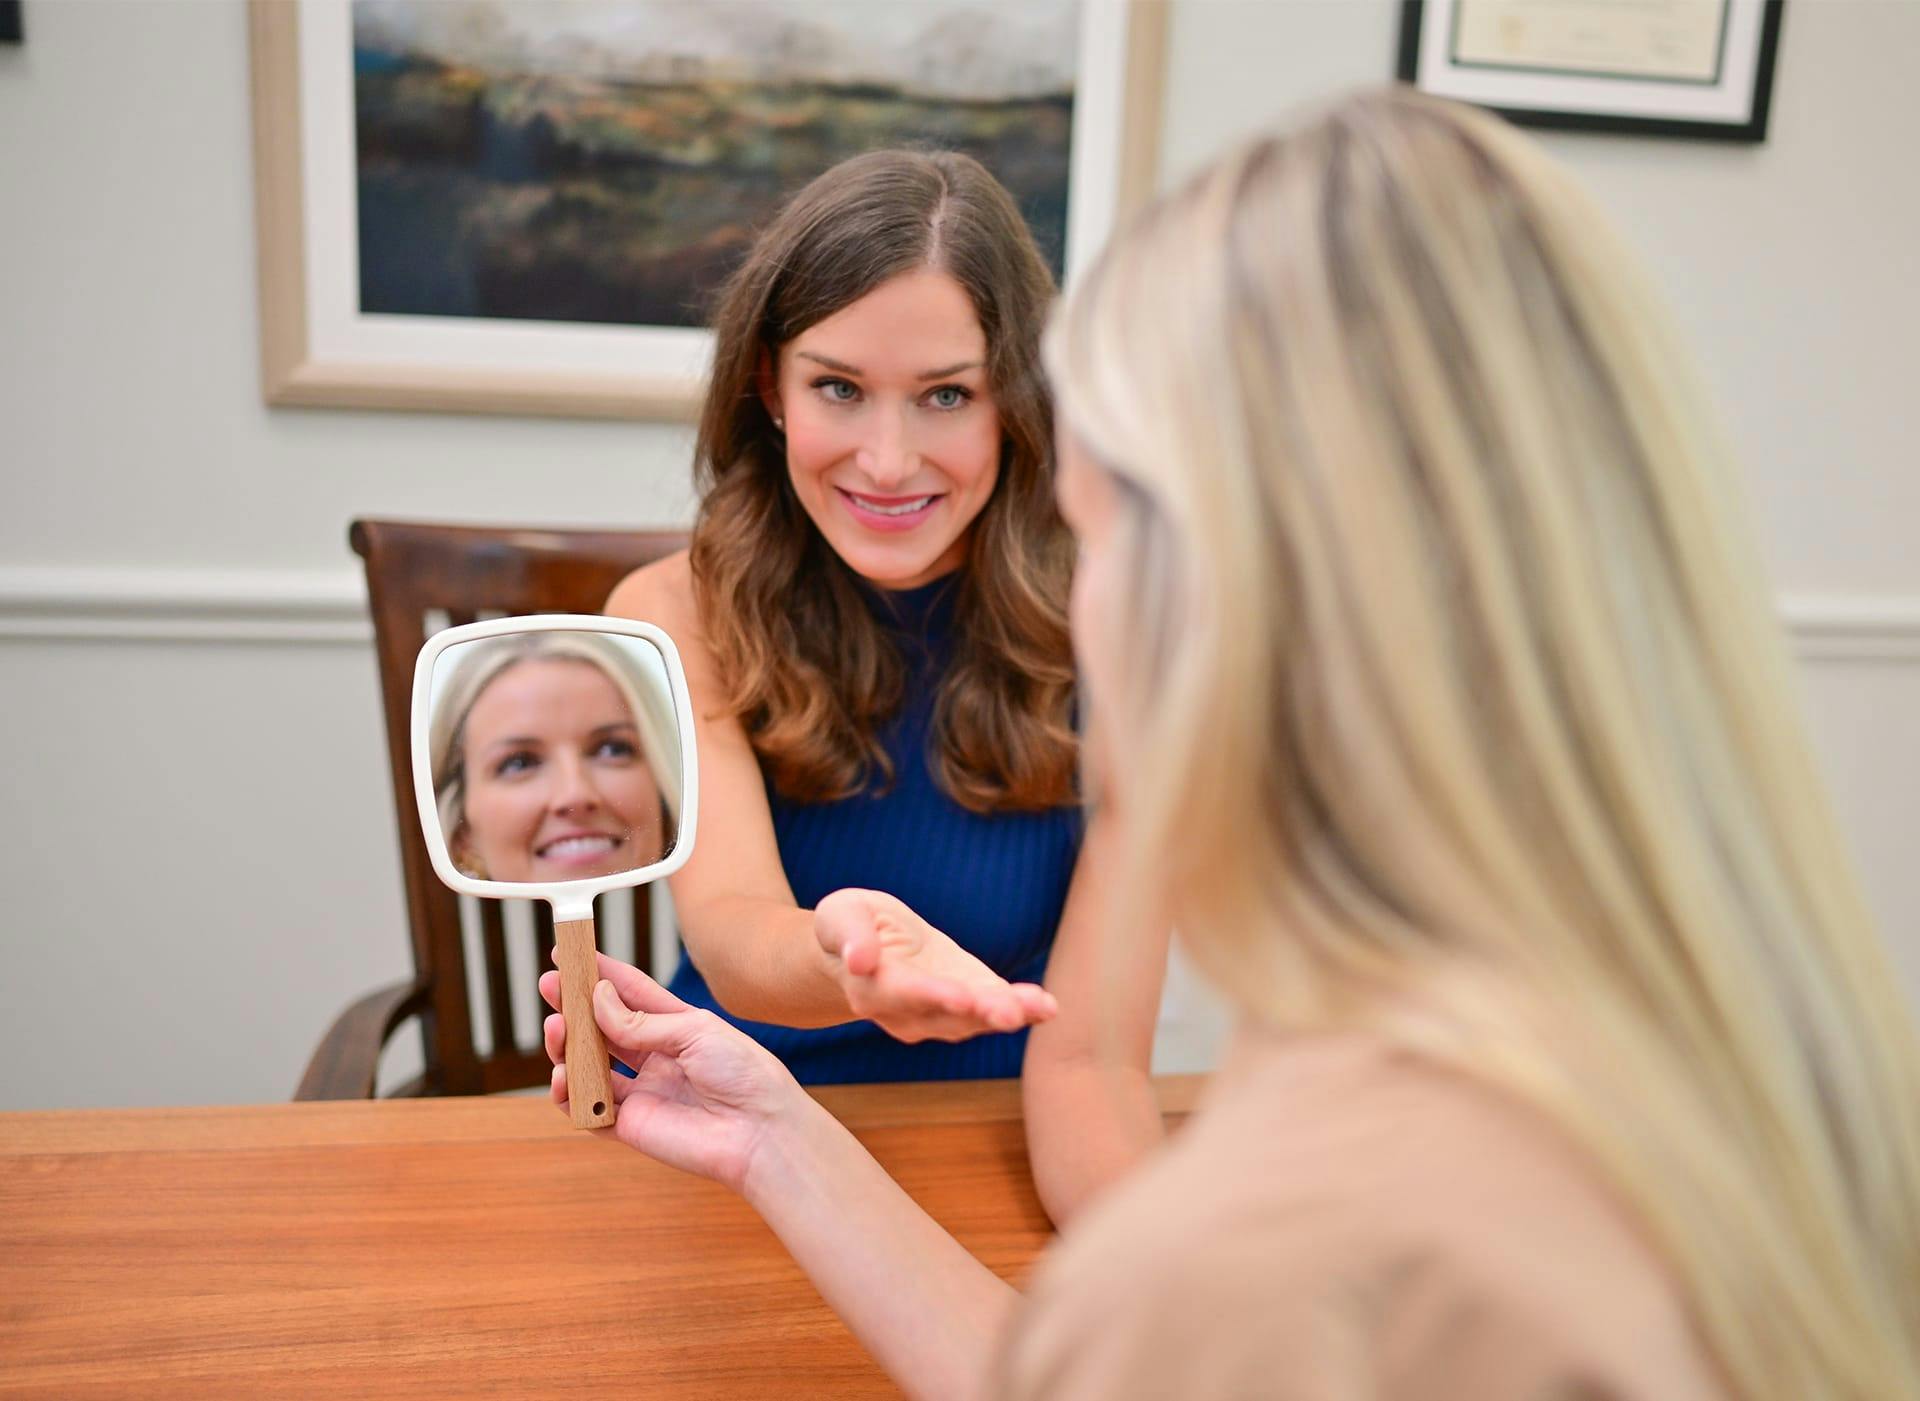 woman looking at her face in a handheld mirror